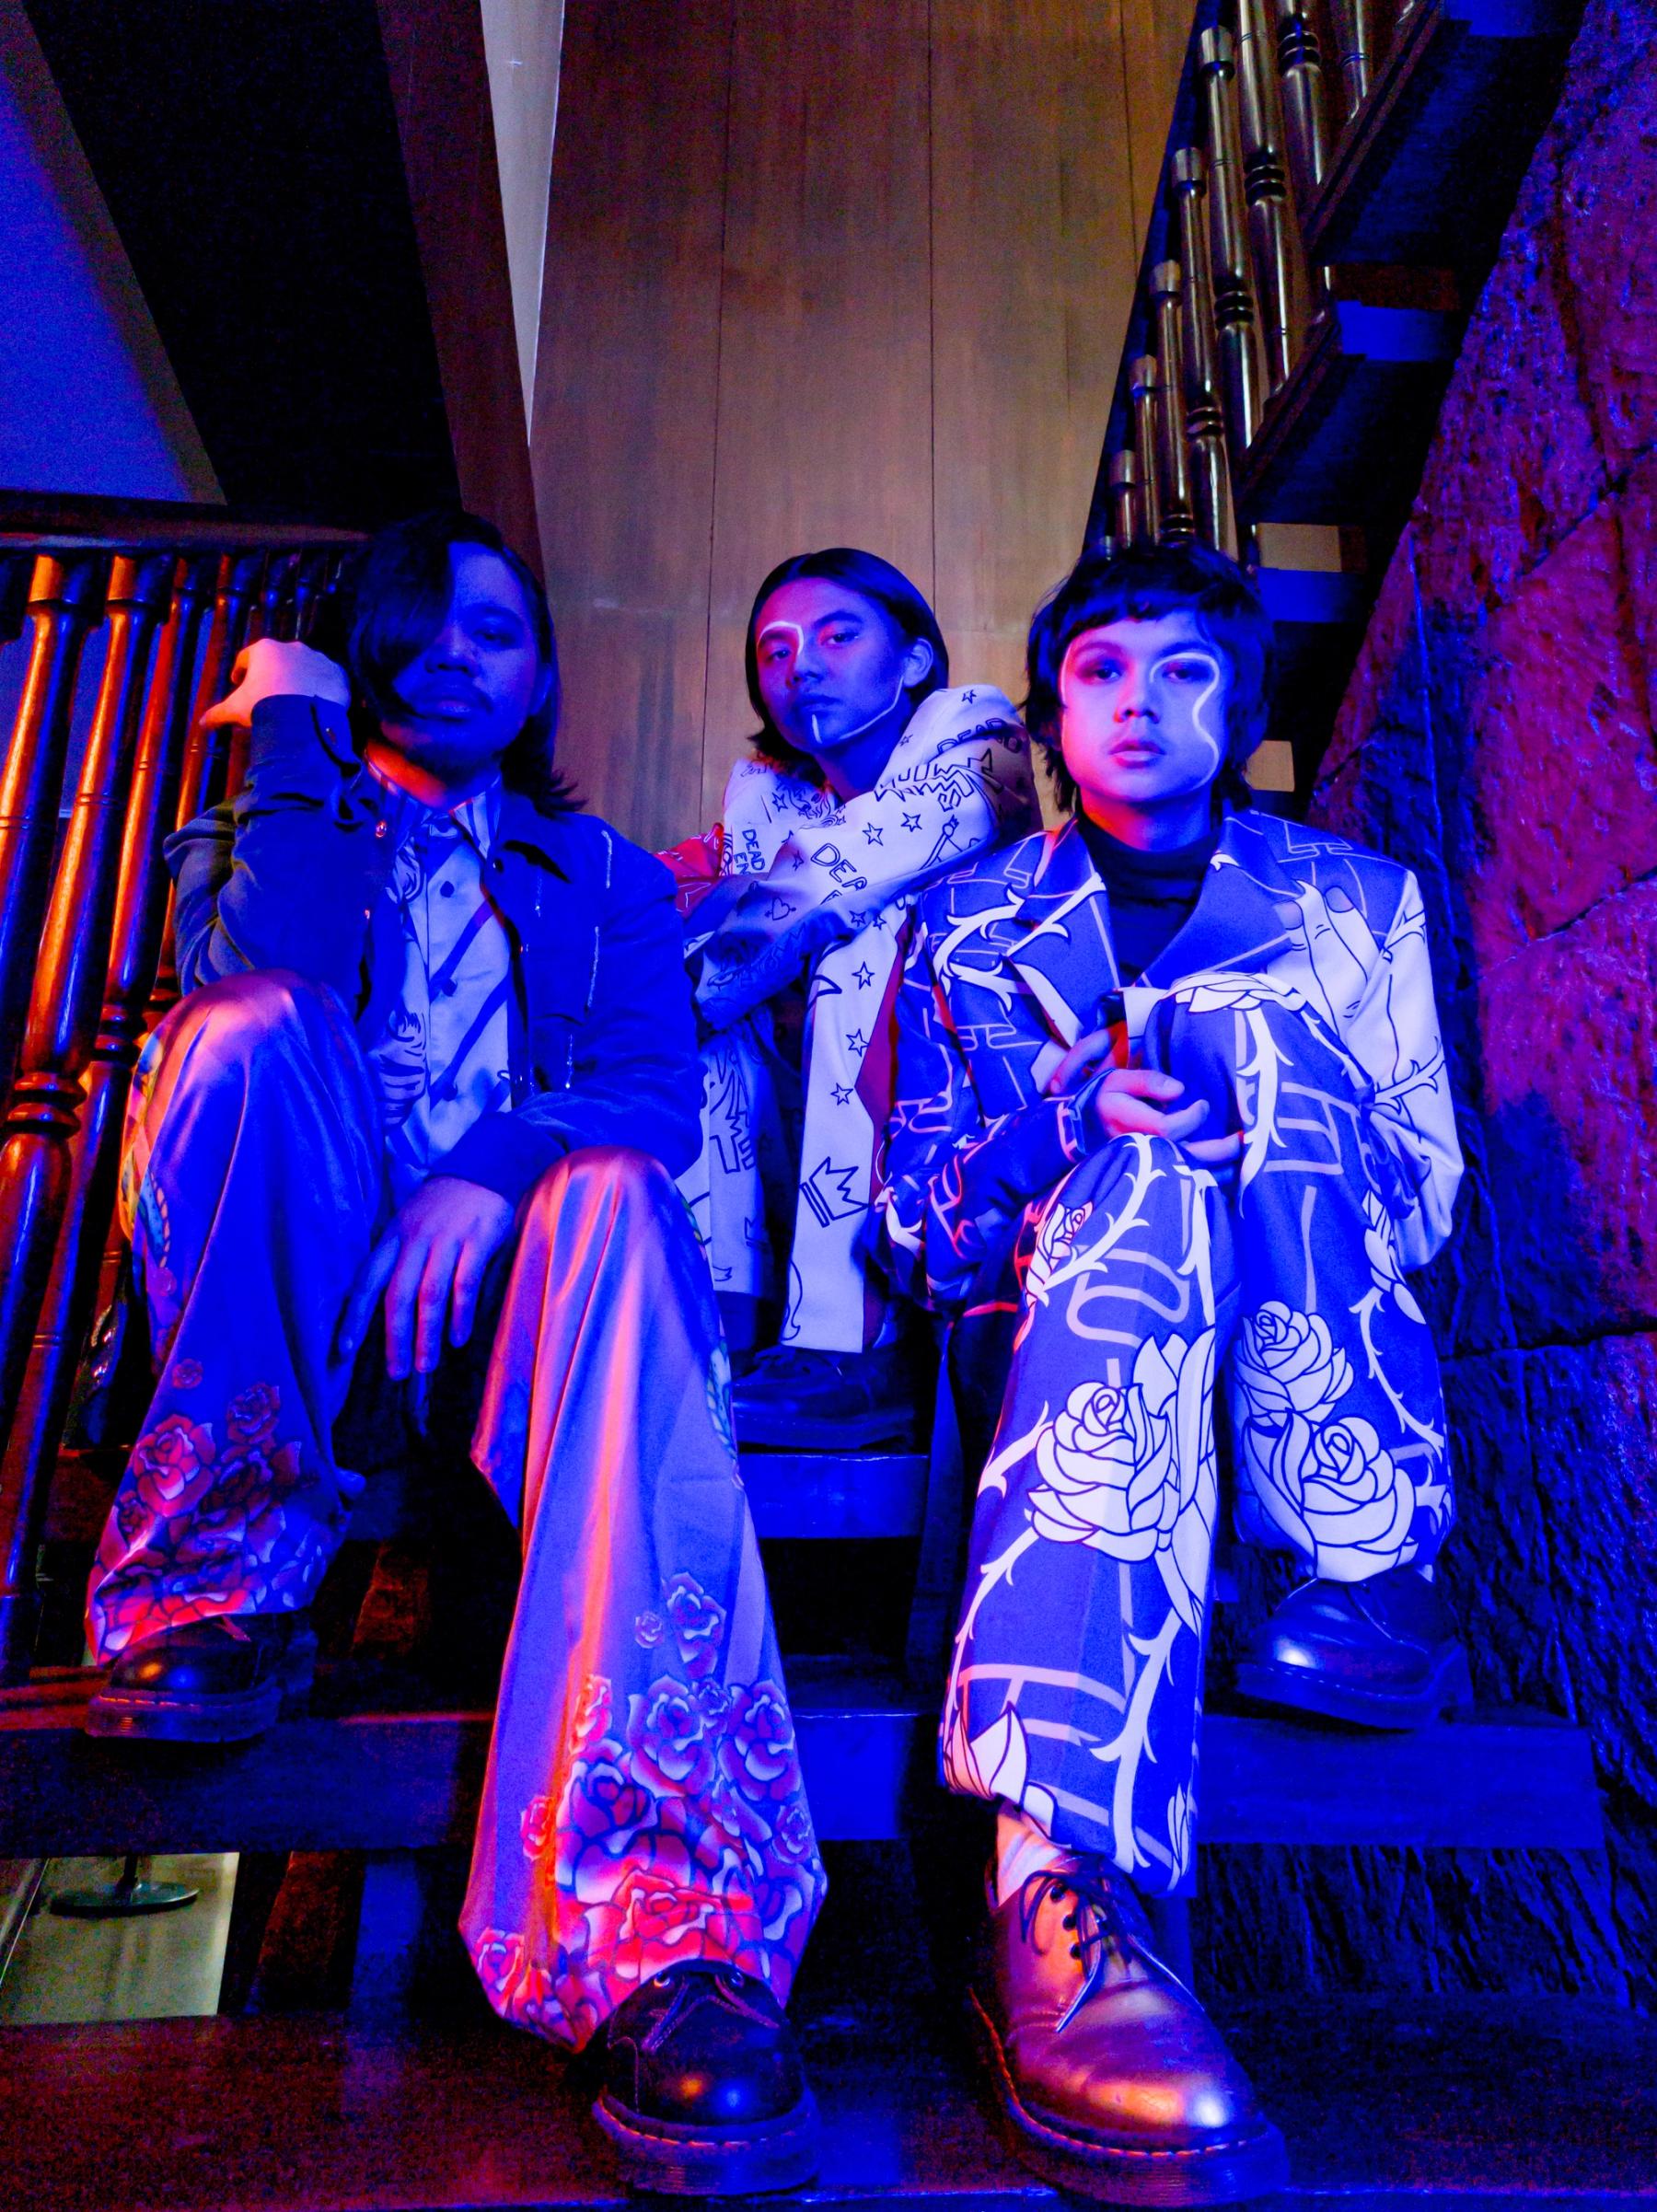 IV of spades are seated on a staircase in pink, blue, and purple lighting